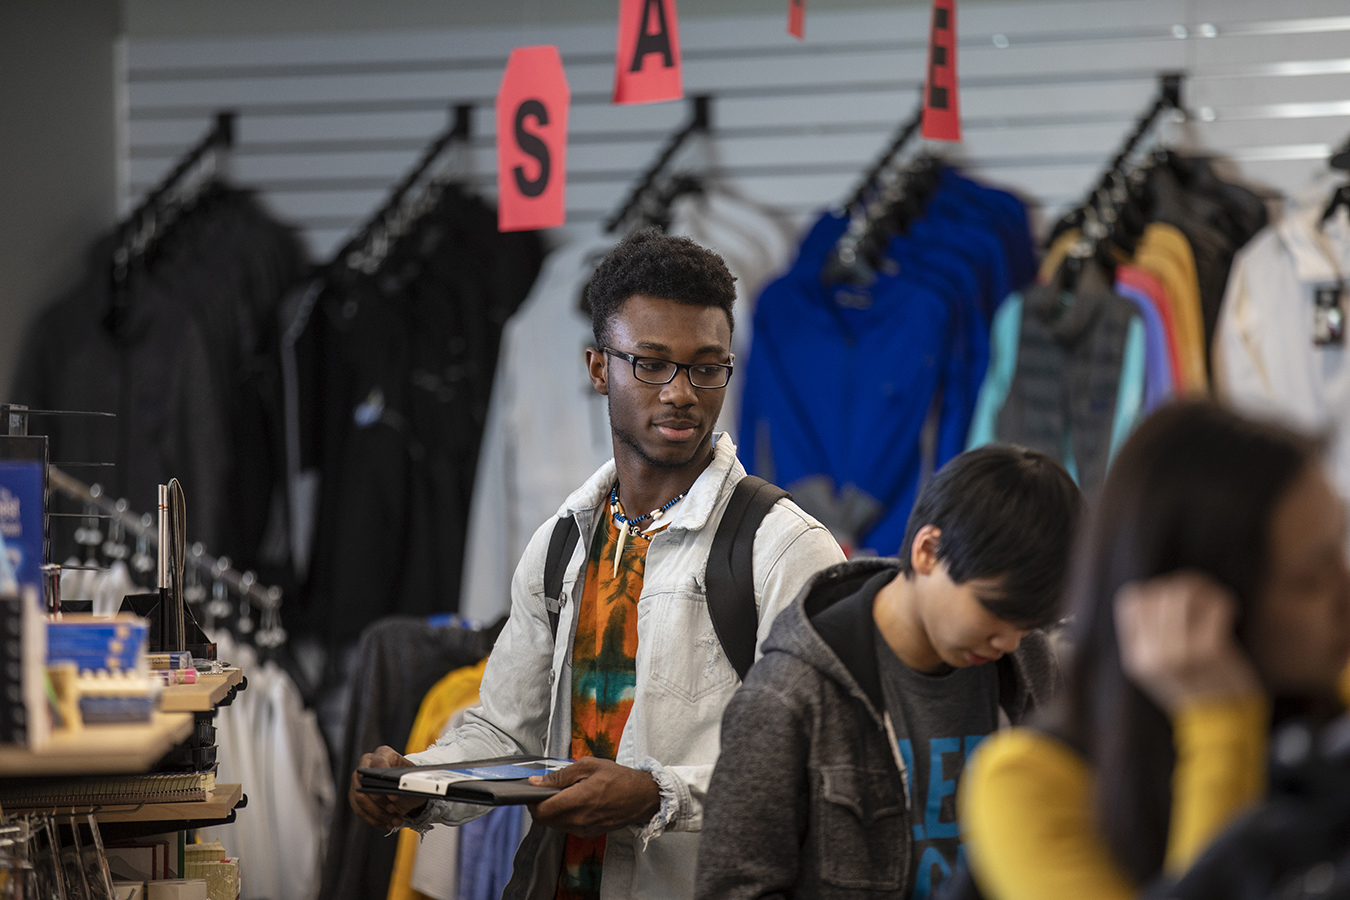 student standing in store